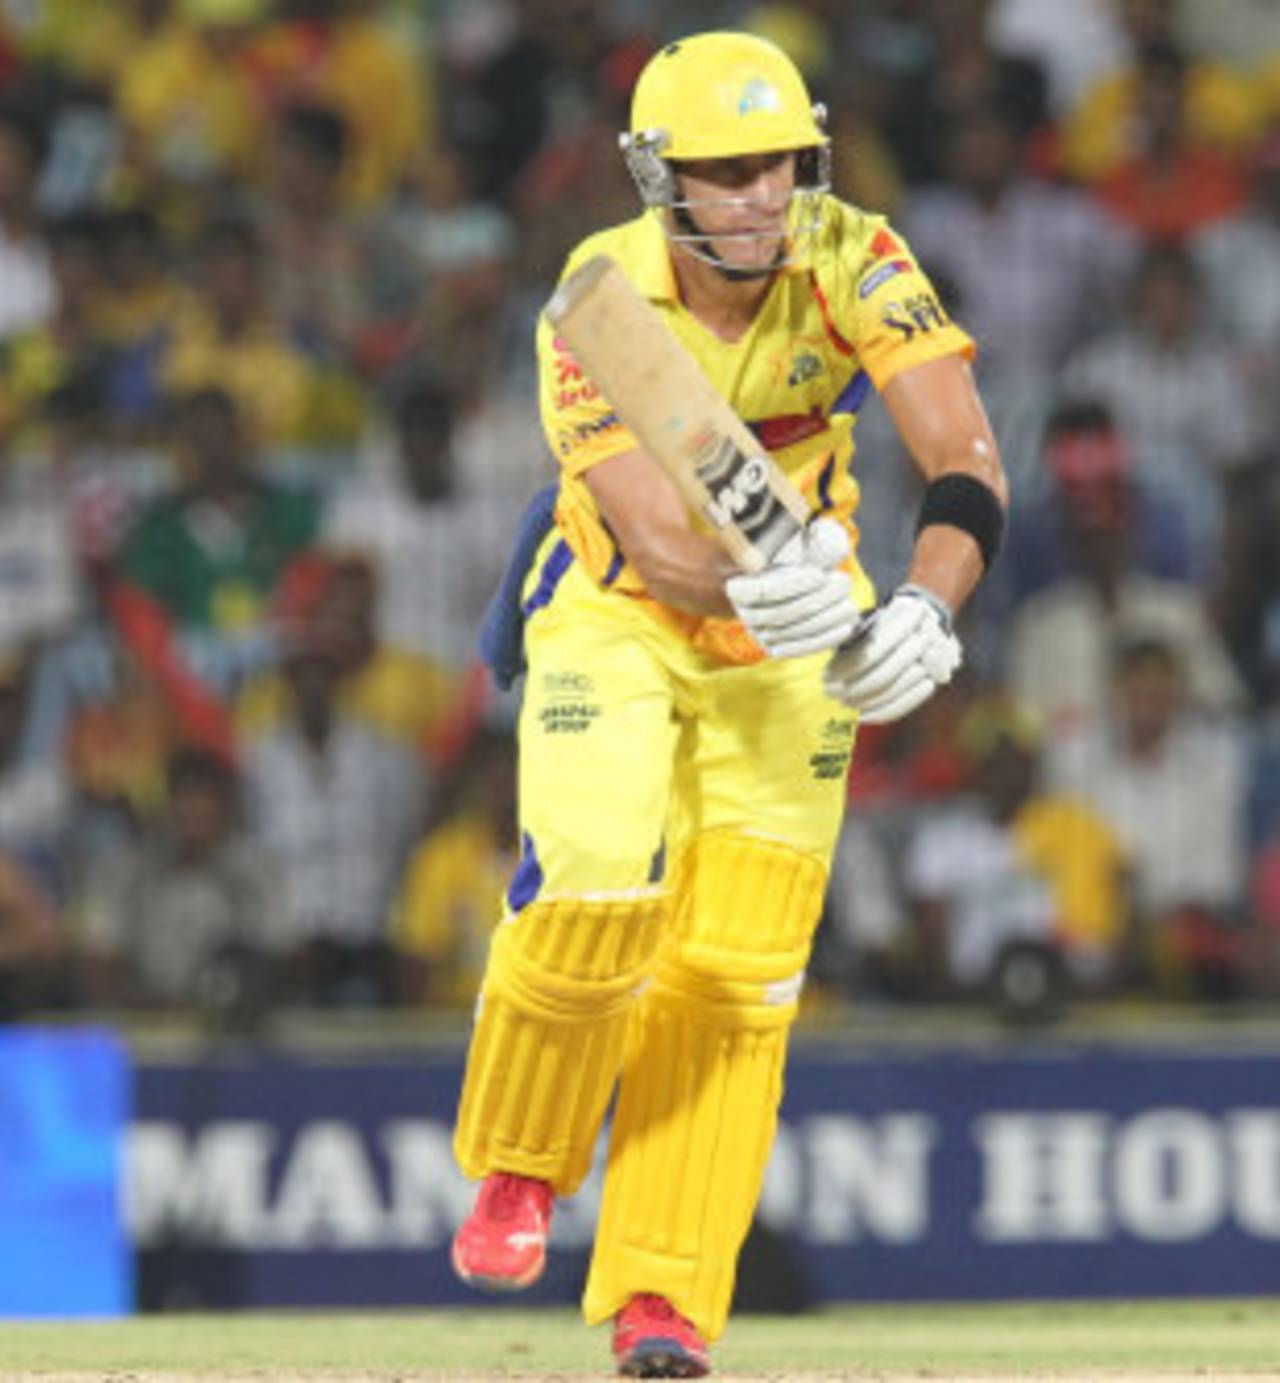 Faf du Plessis works one to the leg side, Chennai Super Kings v Deccan Chargers, IPL, Chennai, May 4, 2012